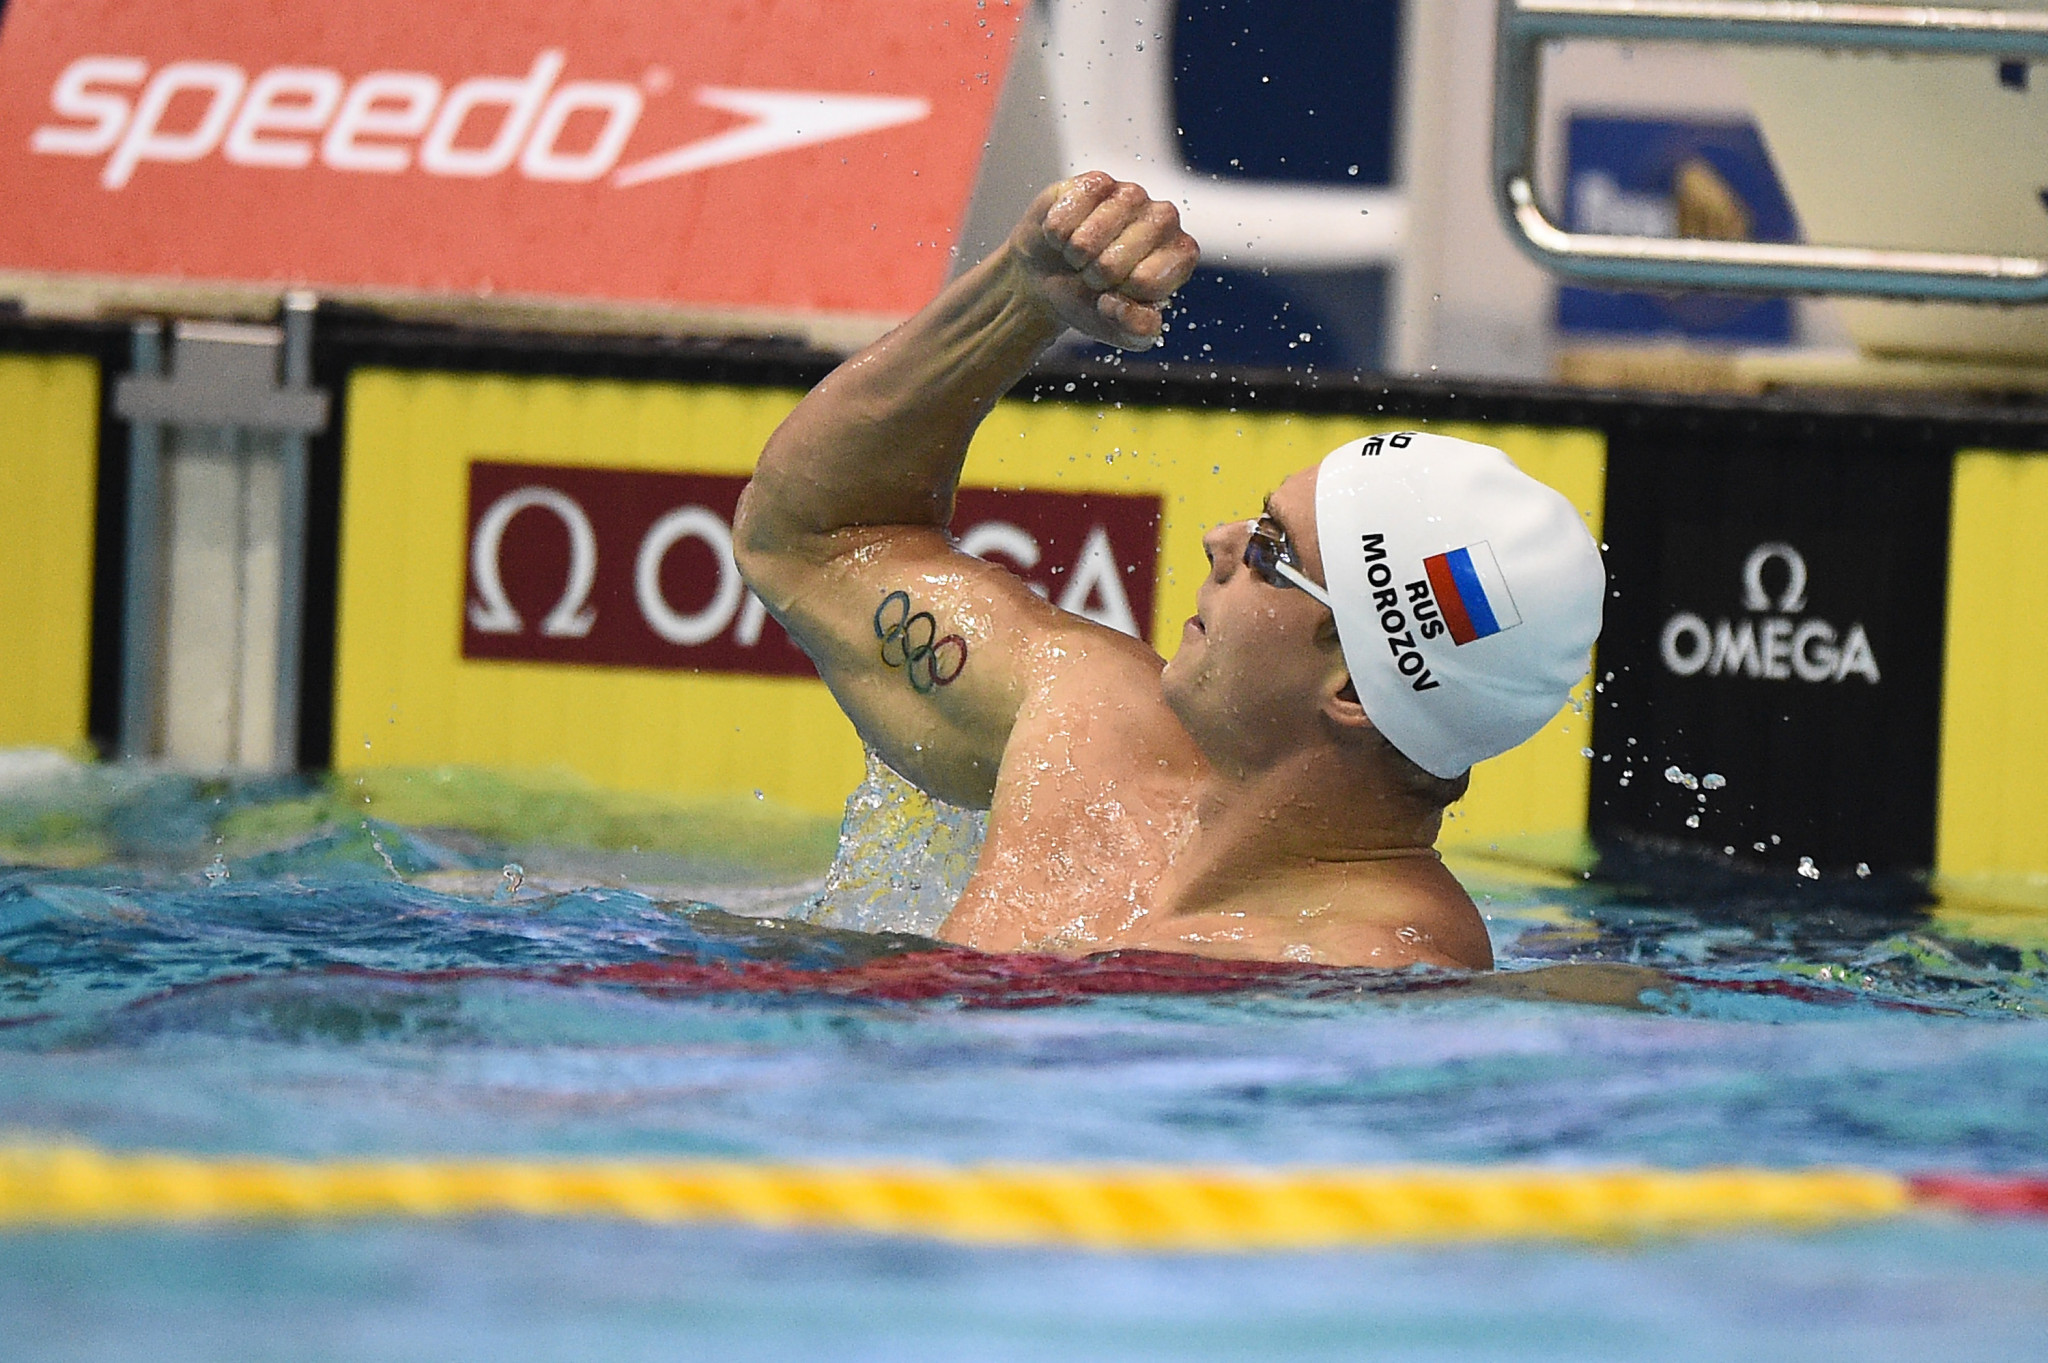 Russia's Vladimir Morozov cemented his place at the top of the men's rankings in the FINA Swimming World Cup when he won the 100m individual medley and 50m freestyle in Singapore ©Getty Images  